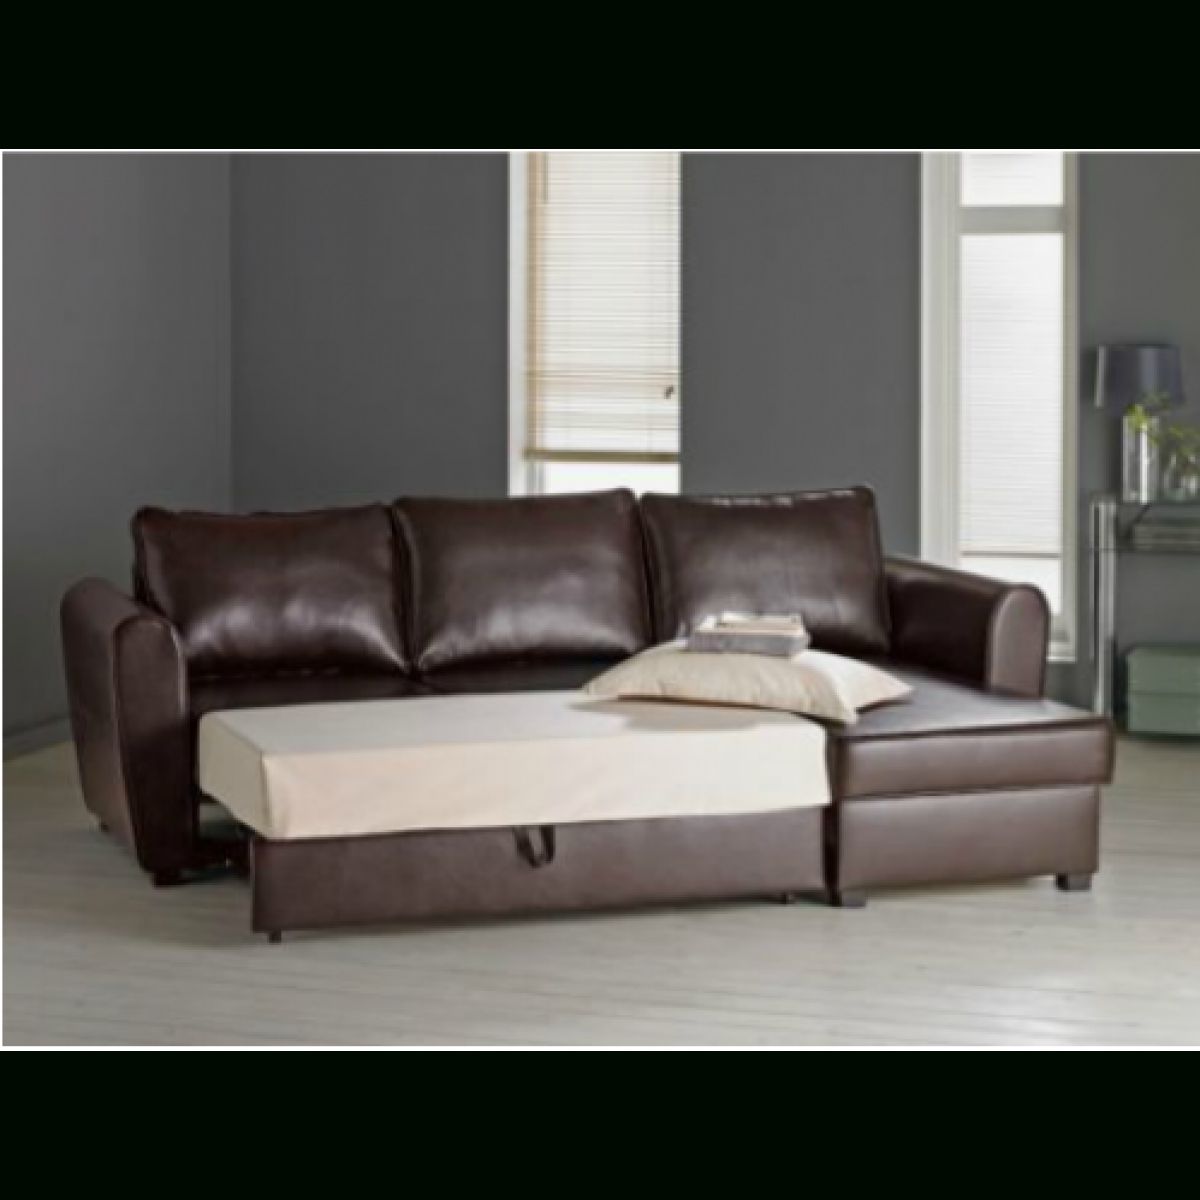 New Siena Fabric Corner Sofa Bed With Storage – Charcoal Throughout Sofa Beds With Storages (View 27 of 30)